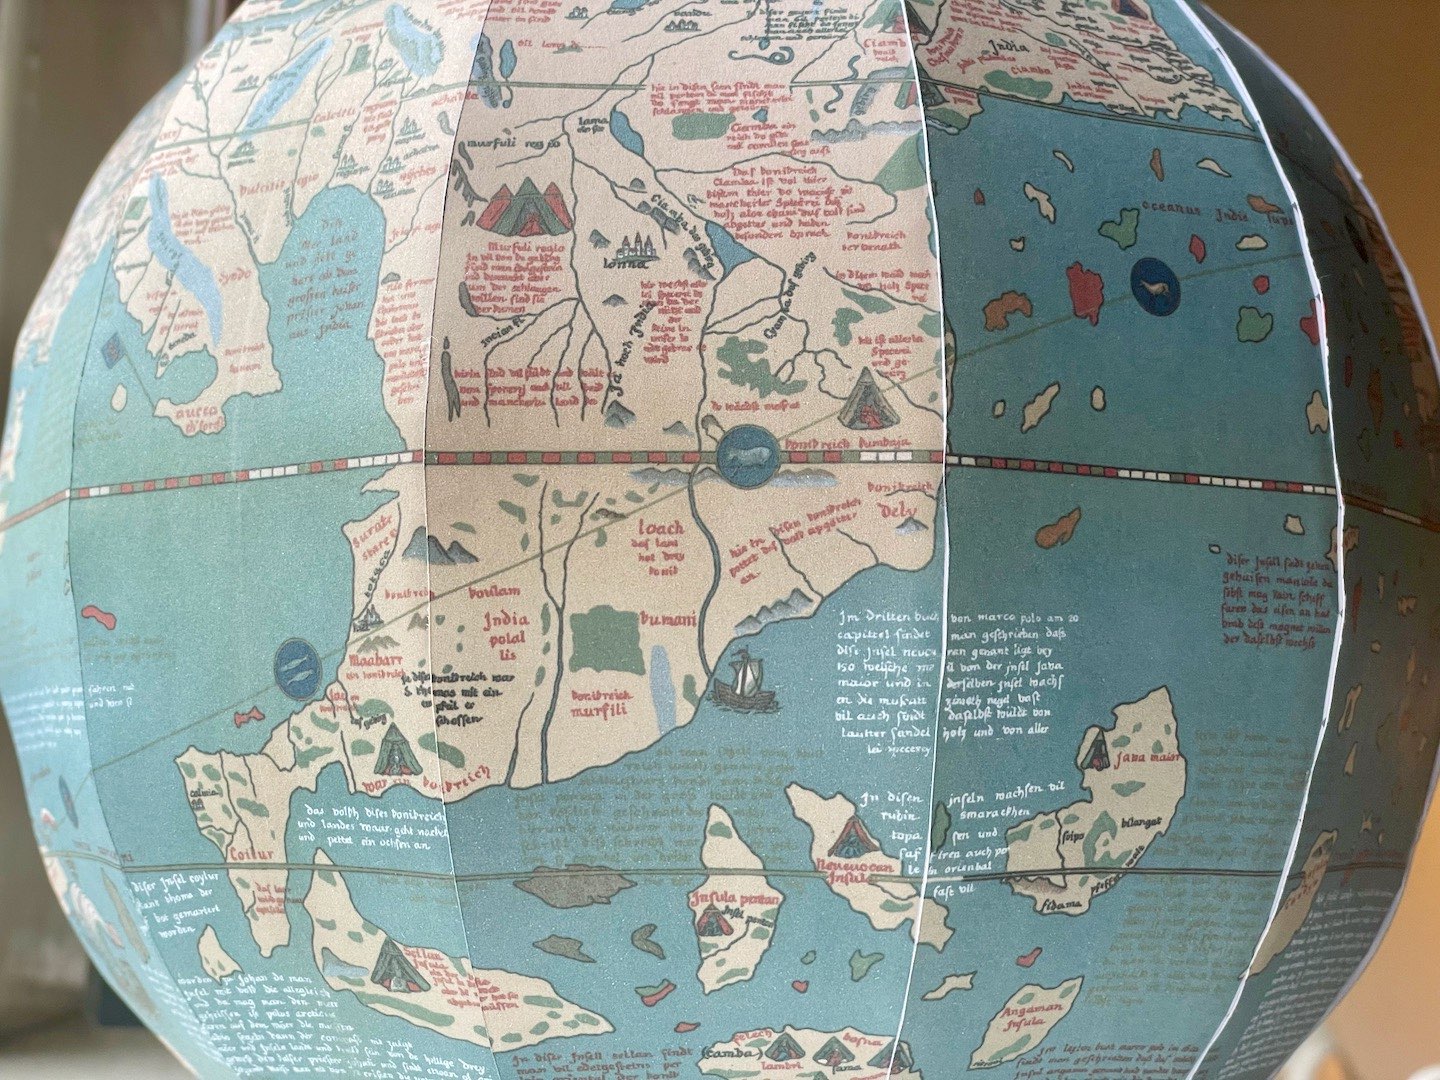 Photograph of the paper globe, showing the equator, India, and Indonesia.